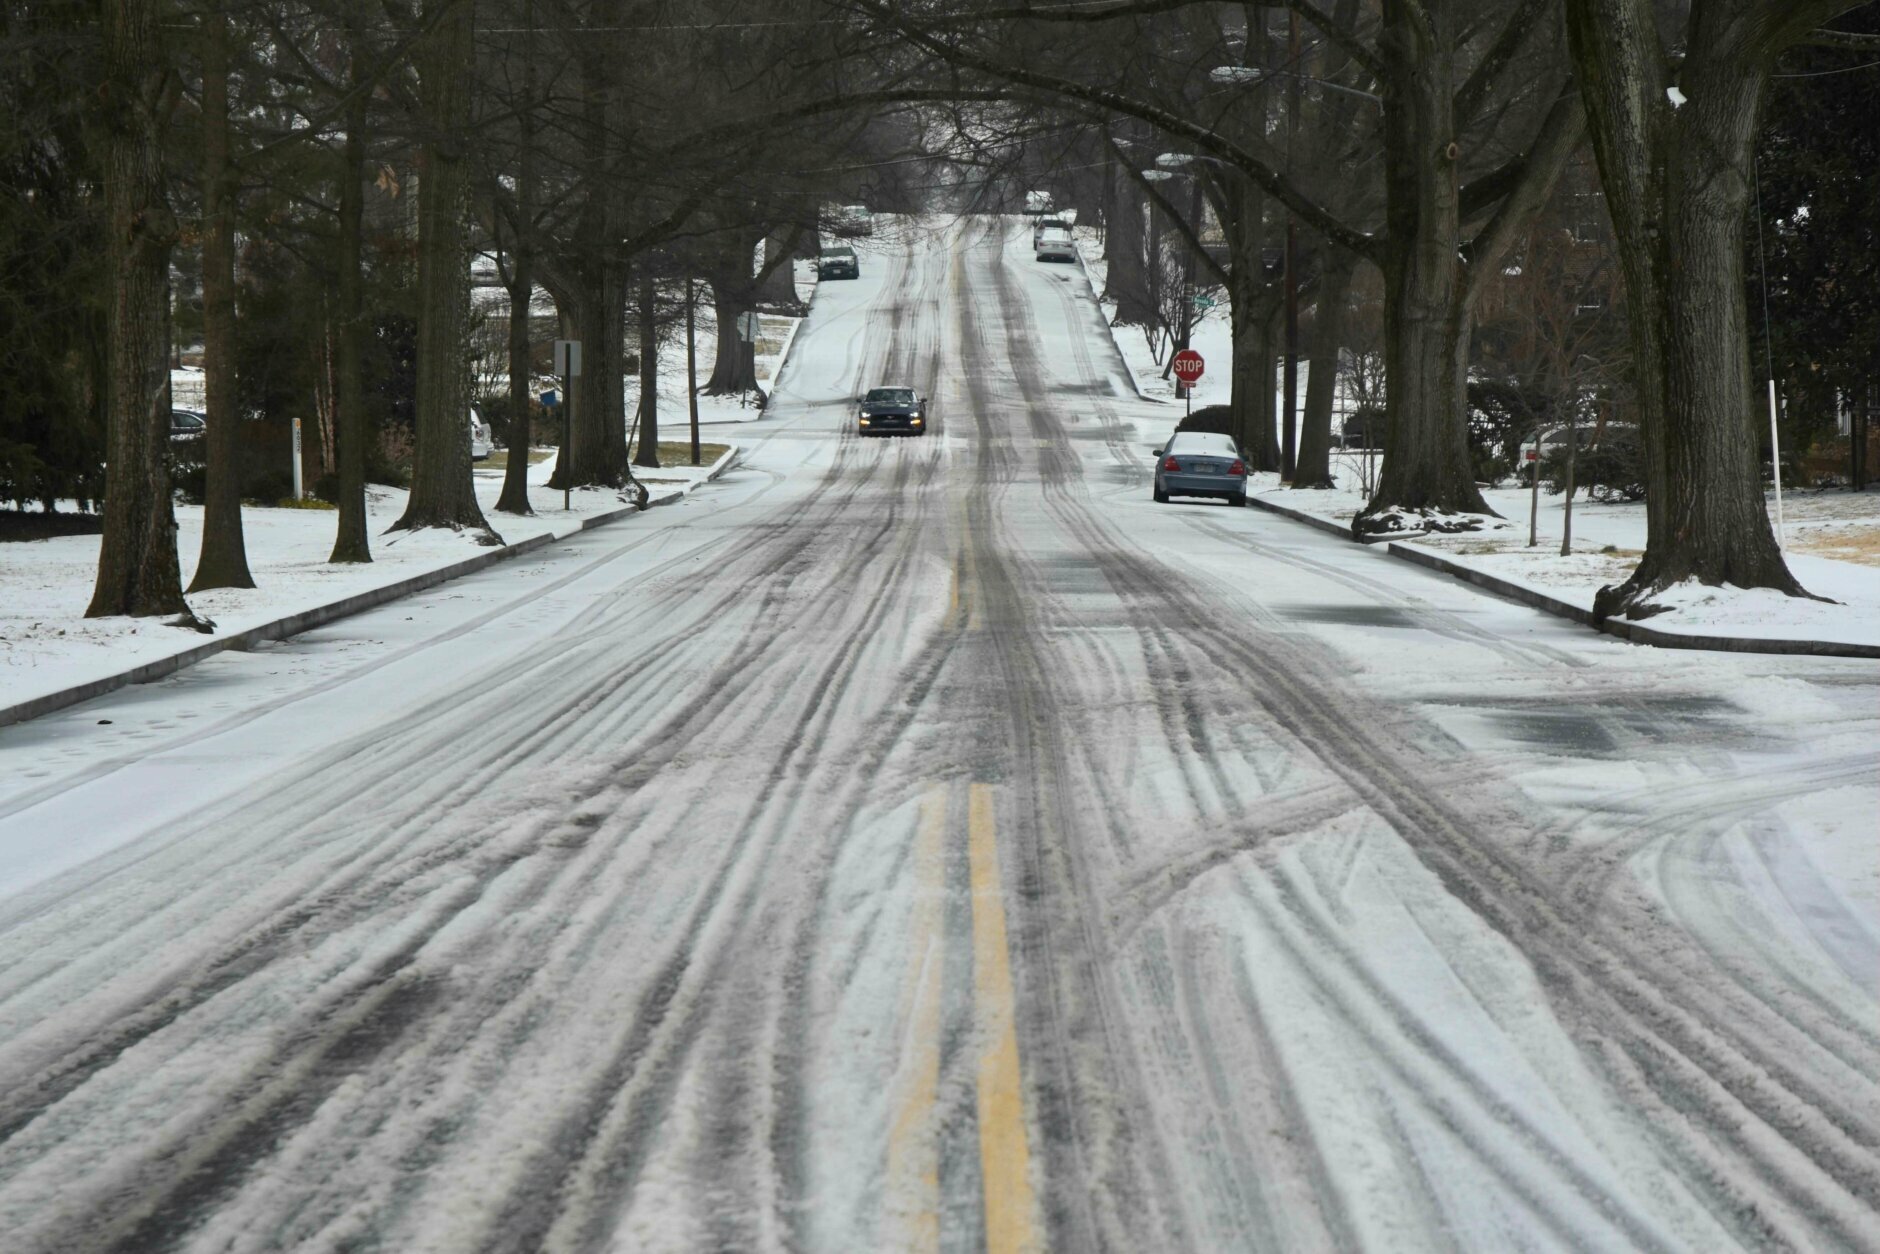 A roadway in the D.C. area covered in snow after a winter storm on Feb. 18, 2021.